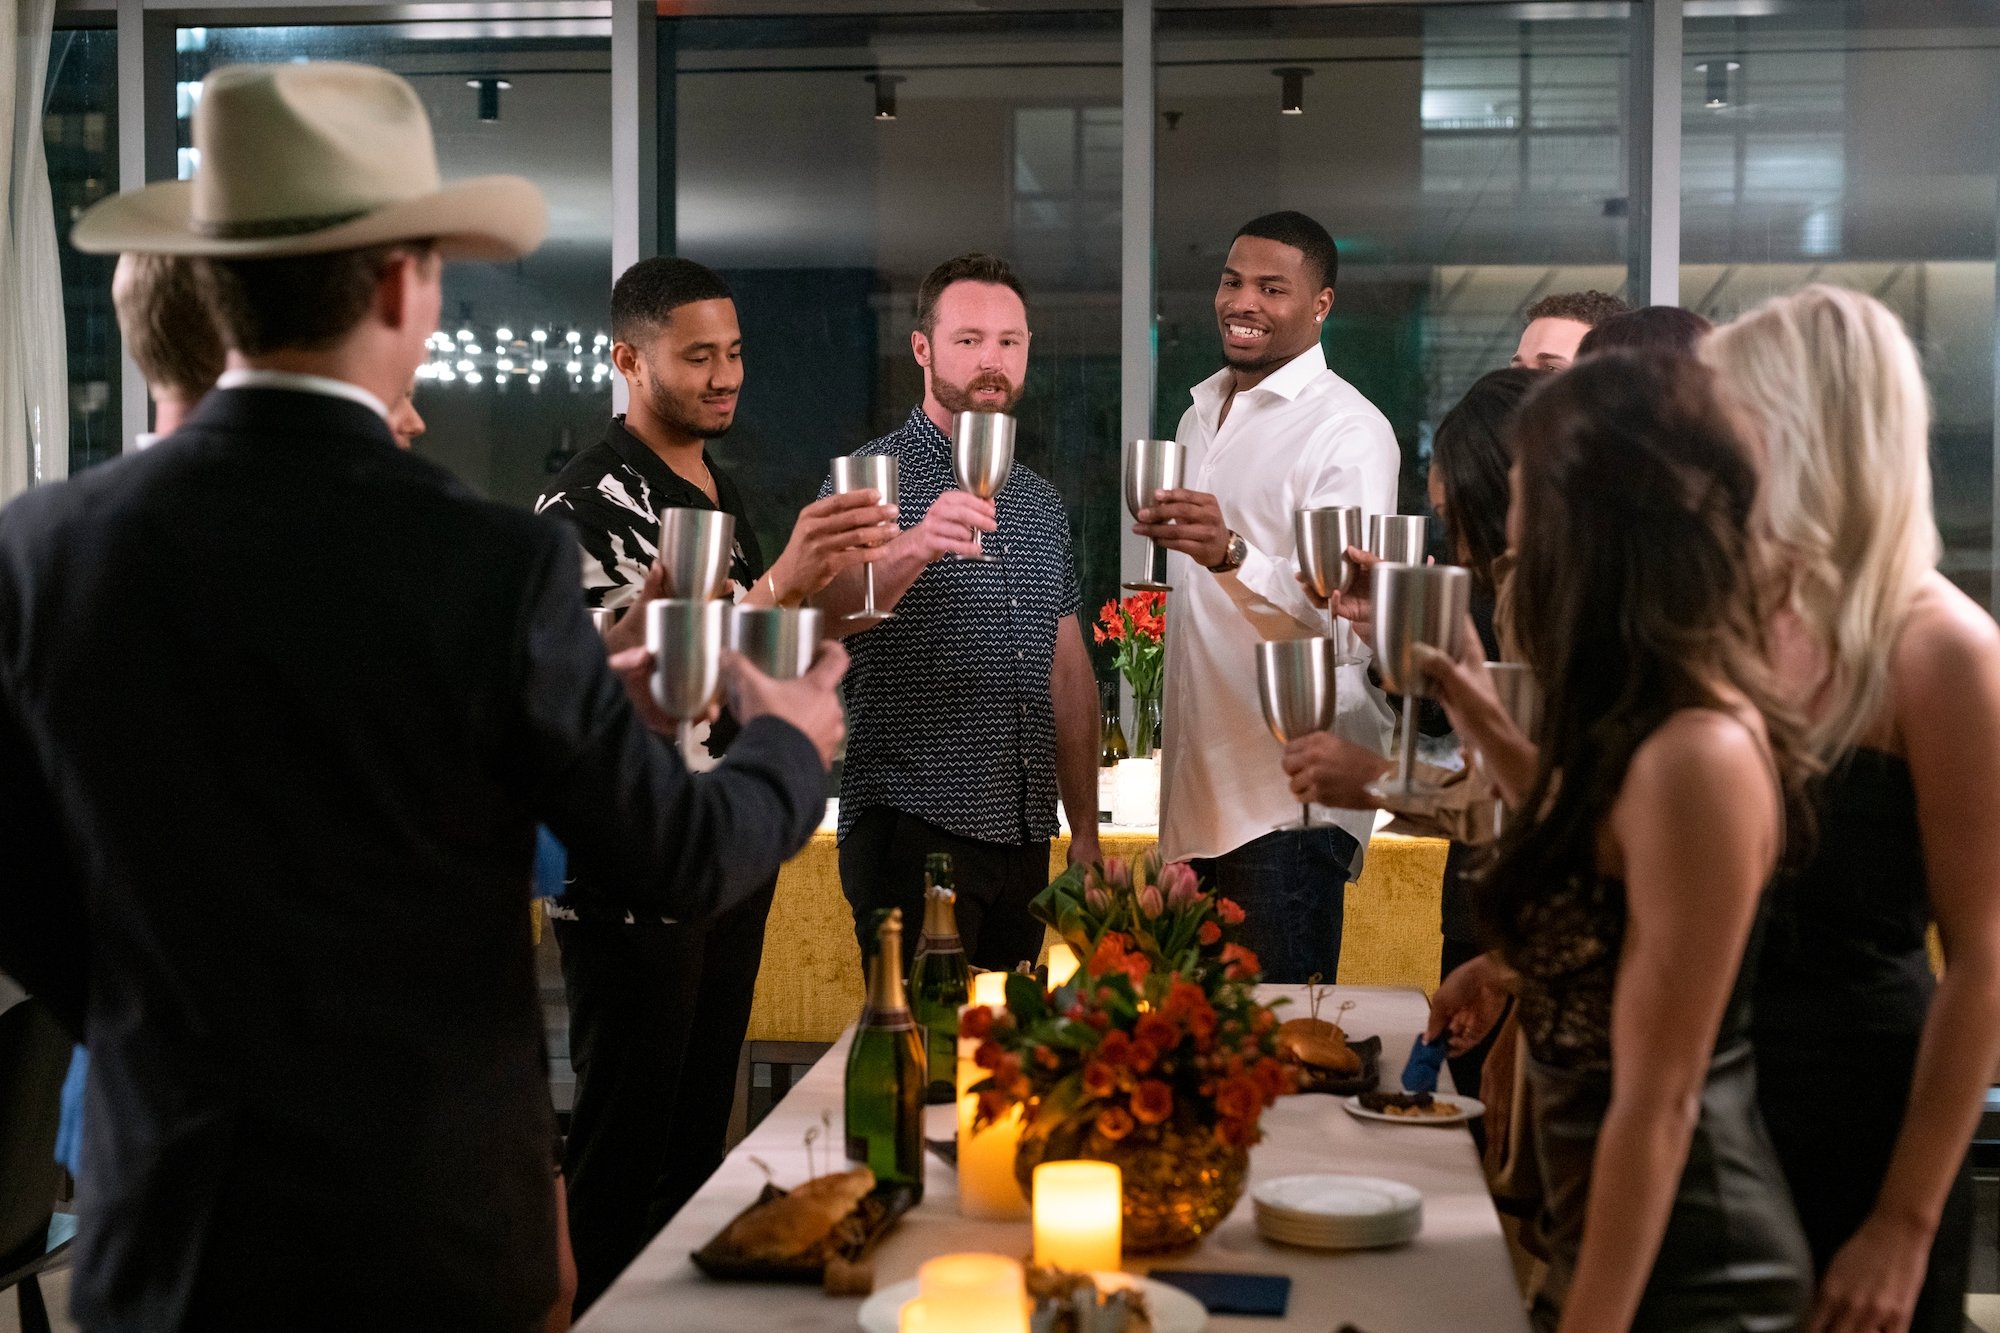 'The Ultimatum' cast toast before they start the experiment